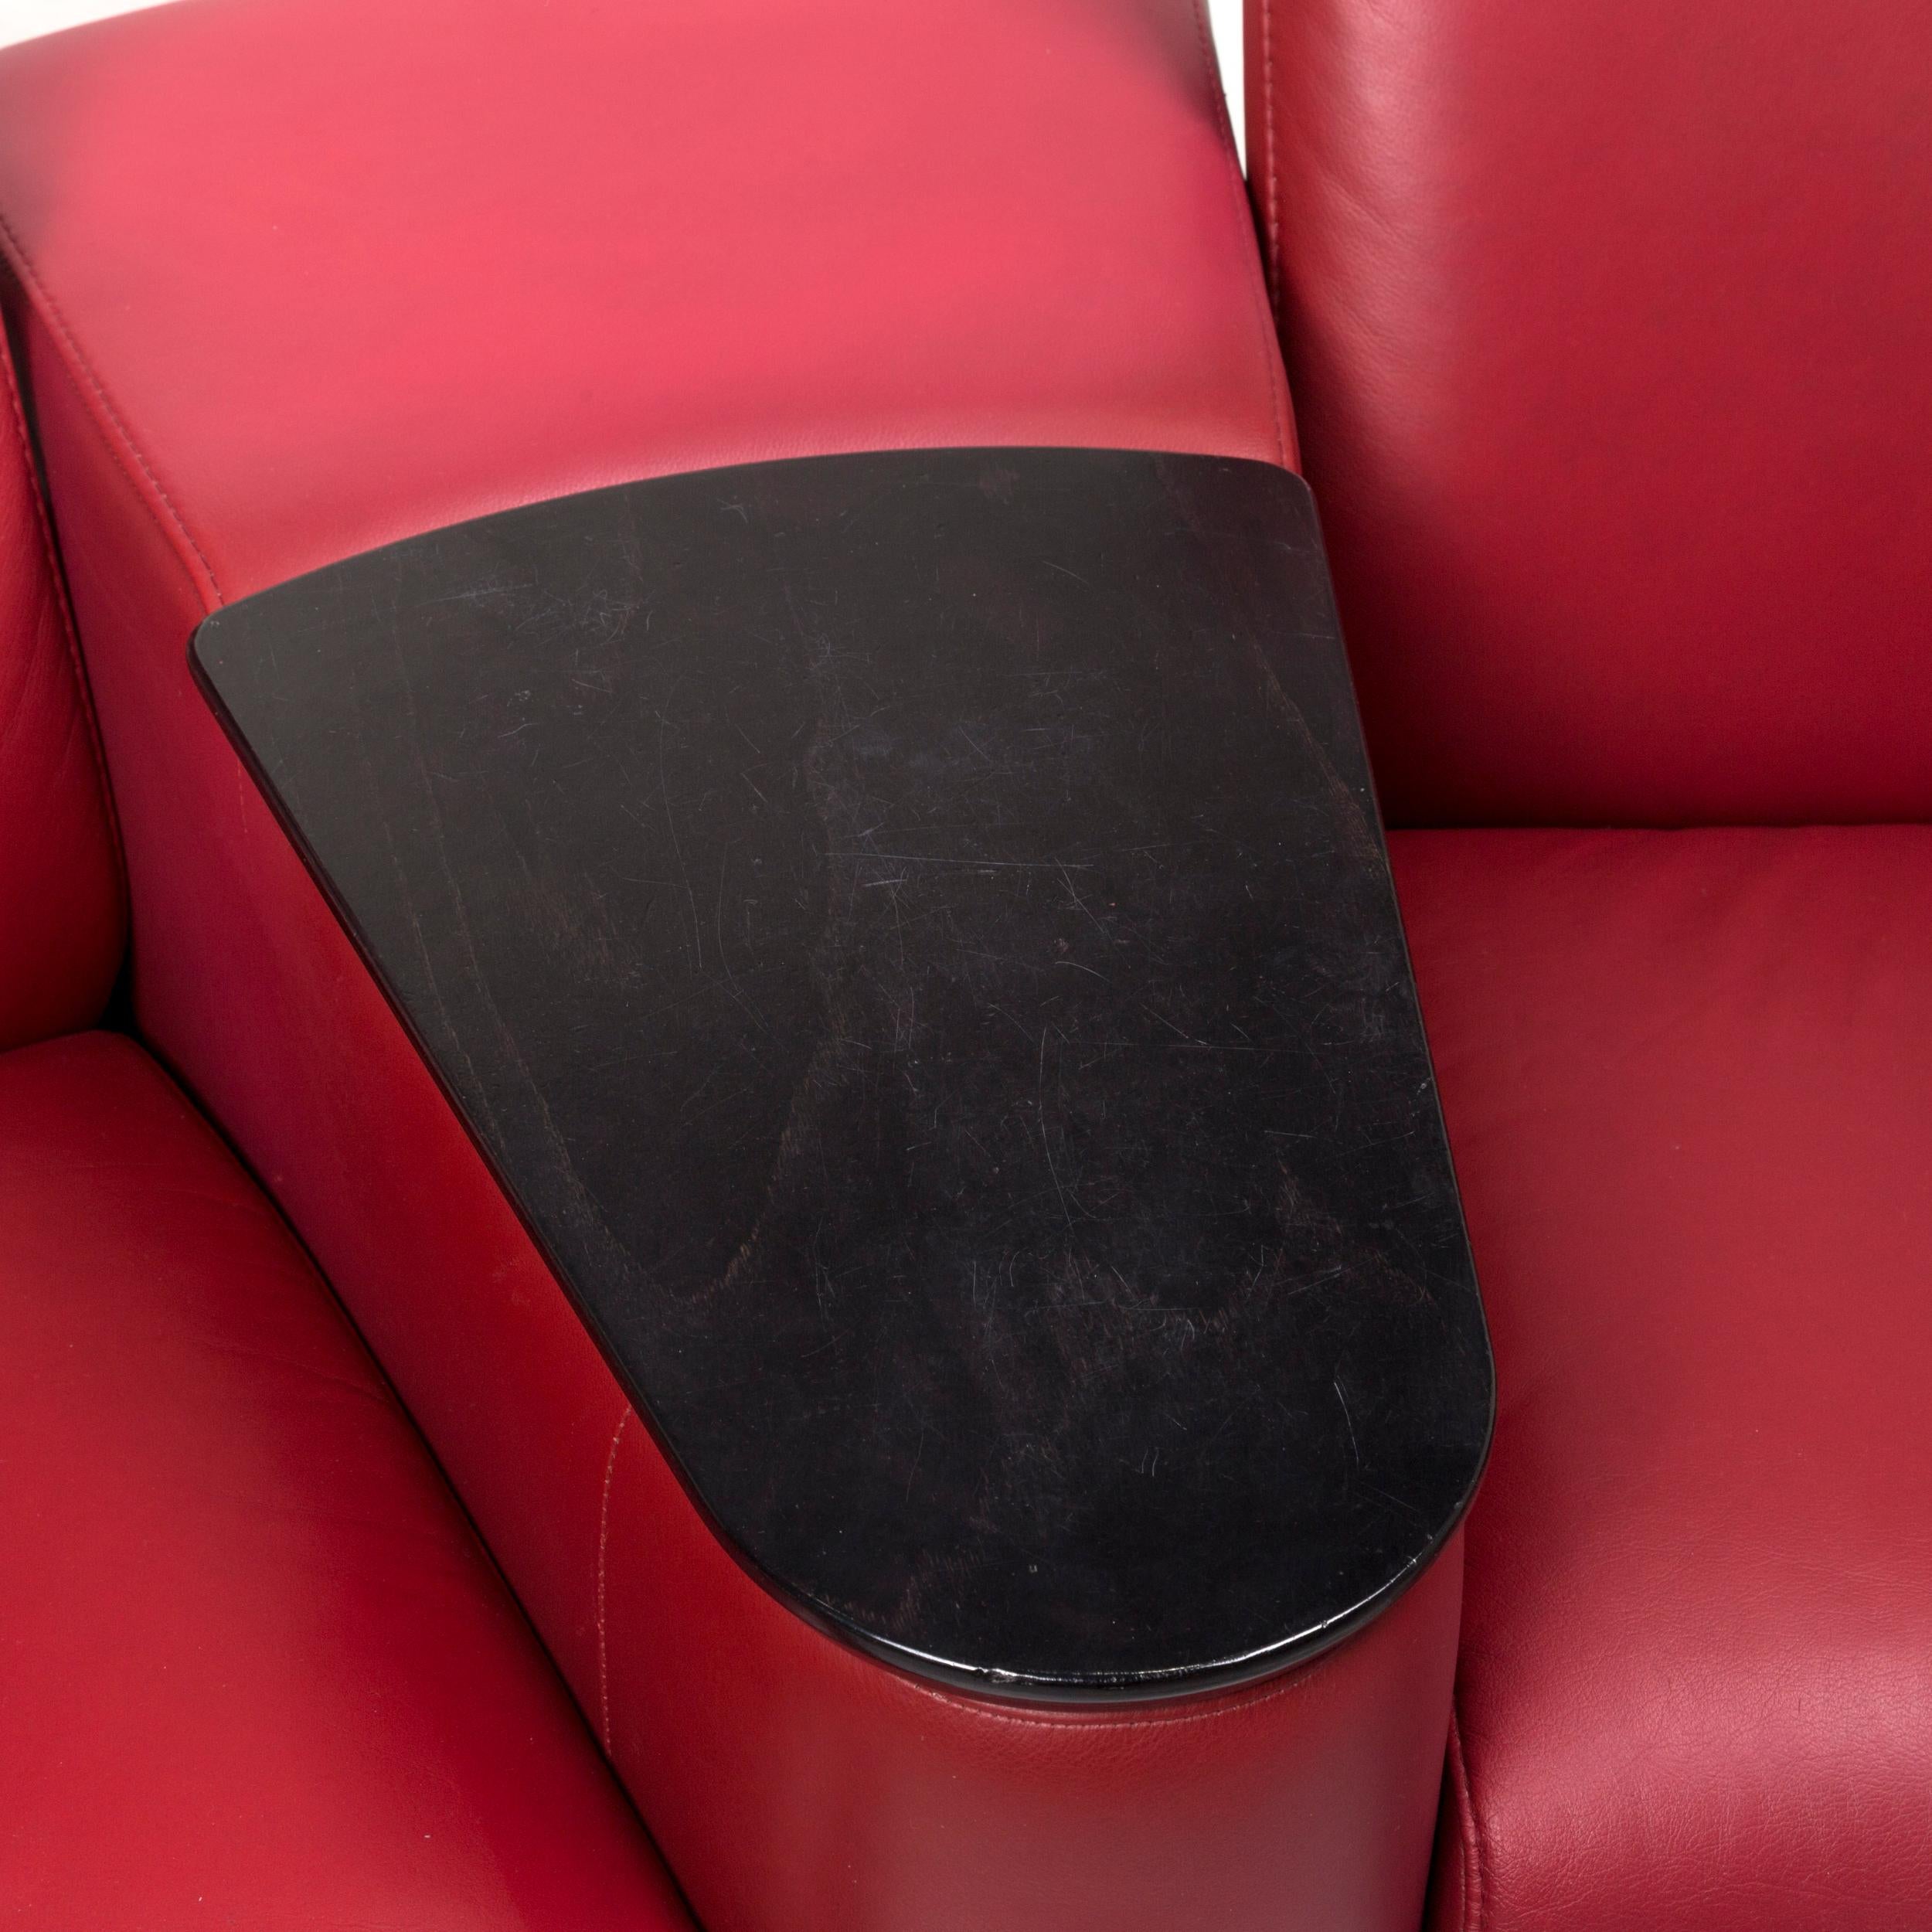 Norwegian Stressless Arion Leather Sofa Red Four-Seat Function Home Theater